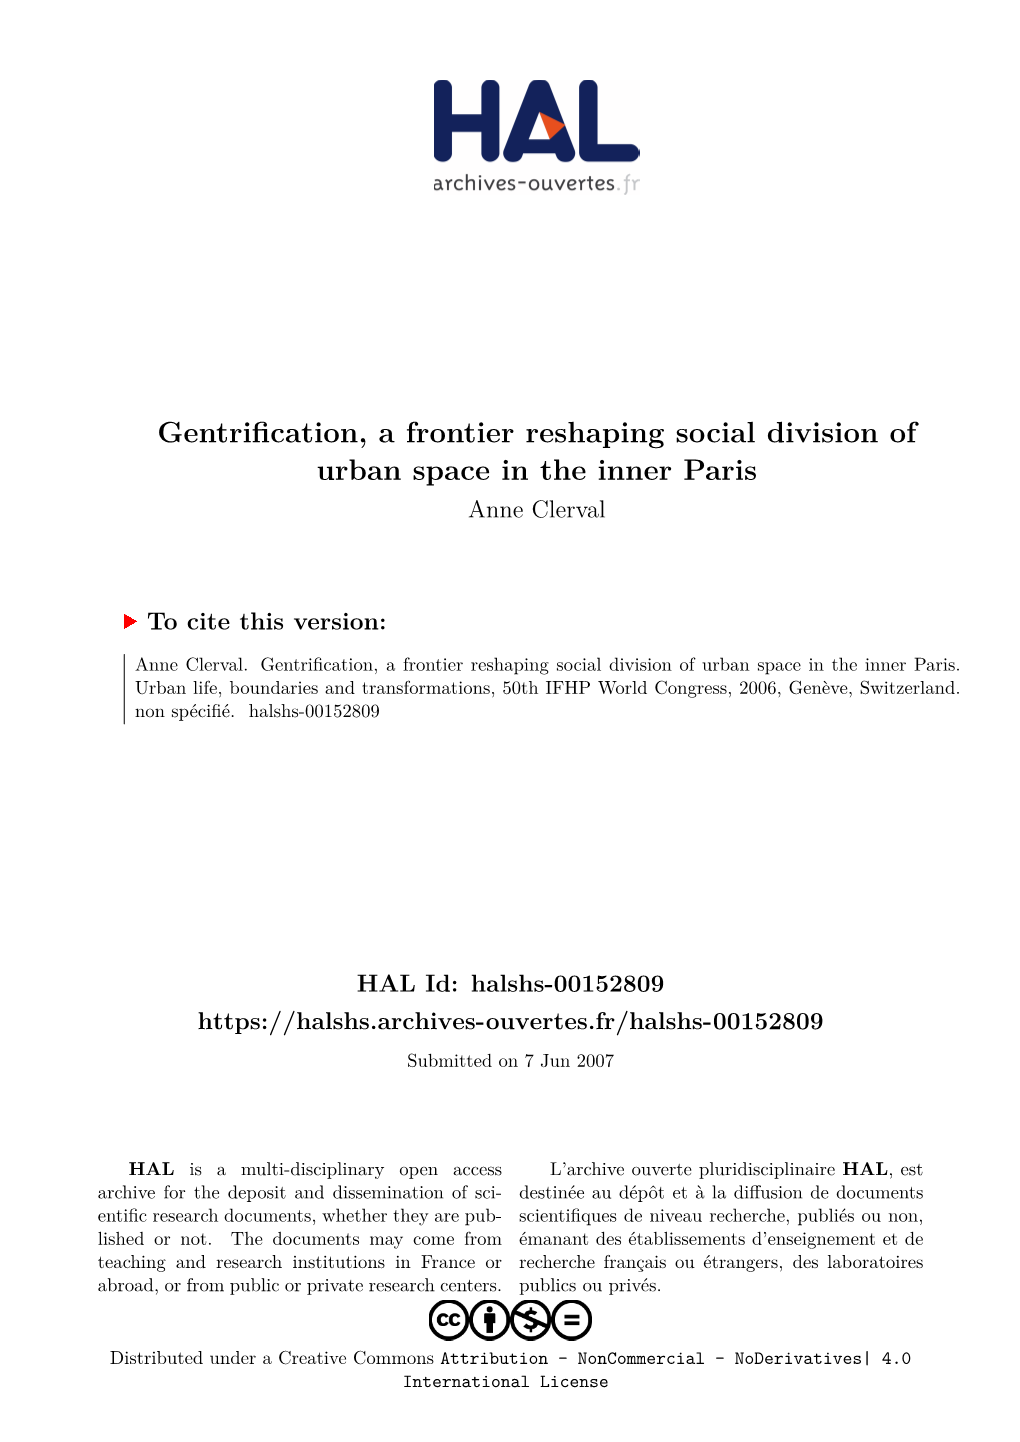 Gentrification, a Frontier Reshaping Social Division of Urban Space in the Inner Paris Anne Clerval